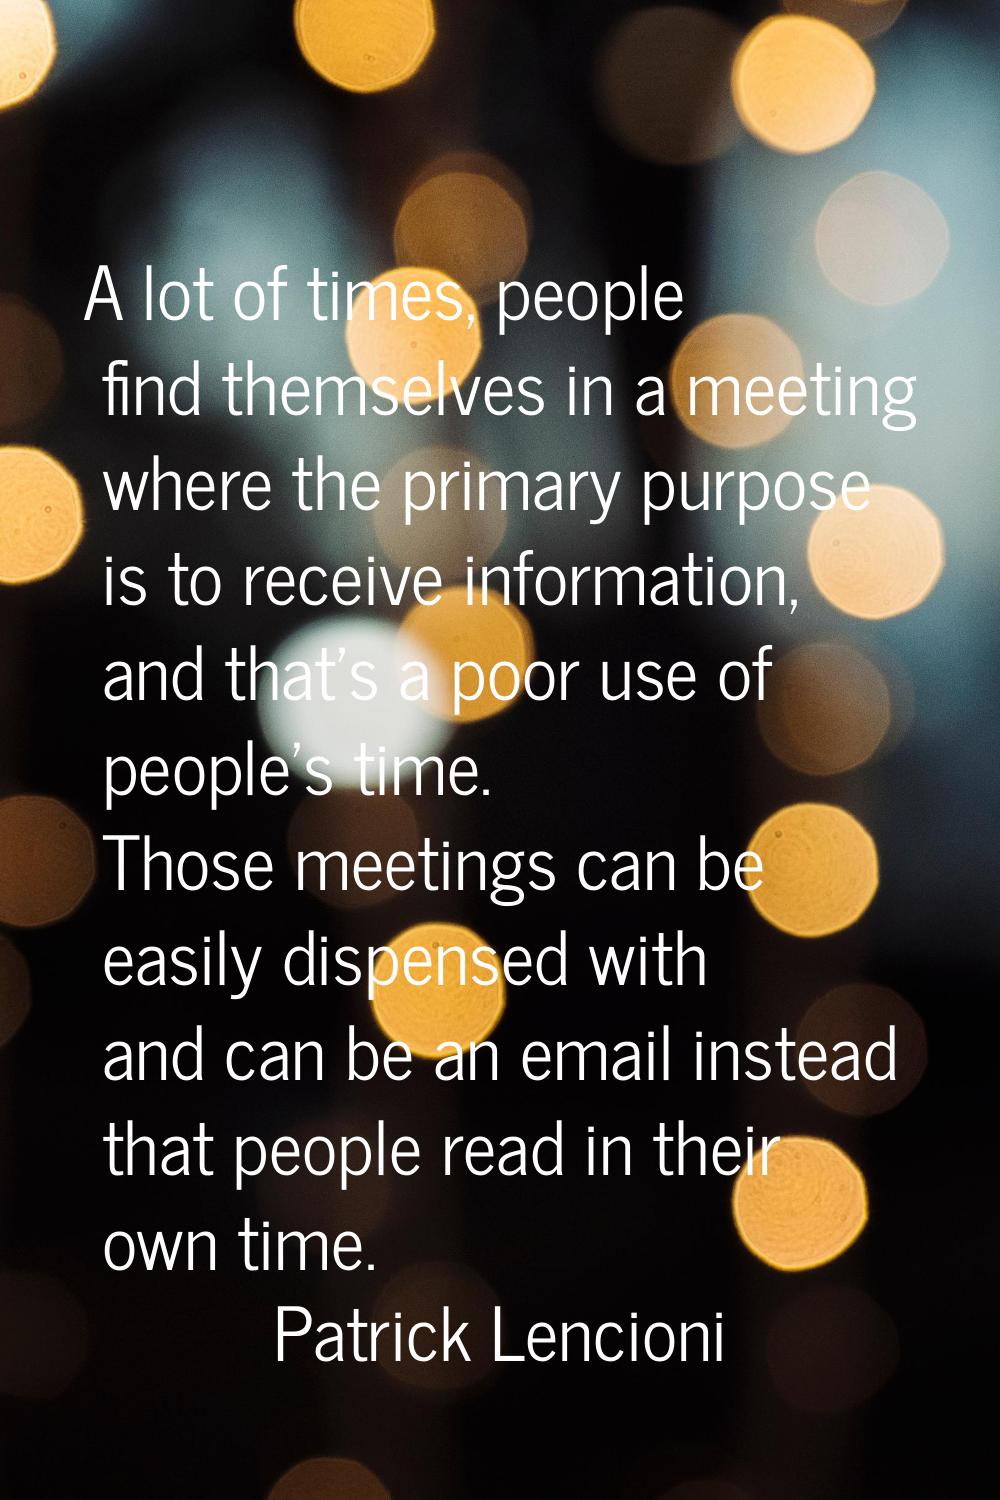 A lot of times, people find themselves in a meeting where the primary purpose is to receive informa